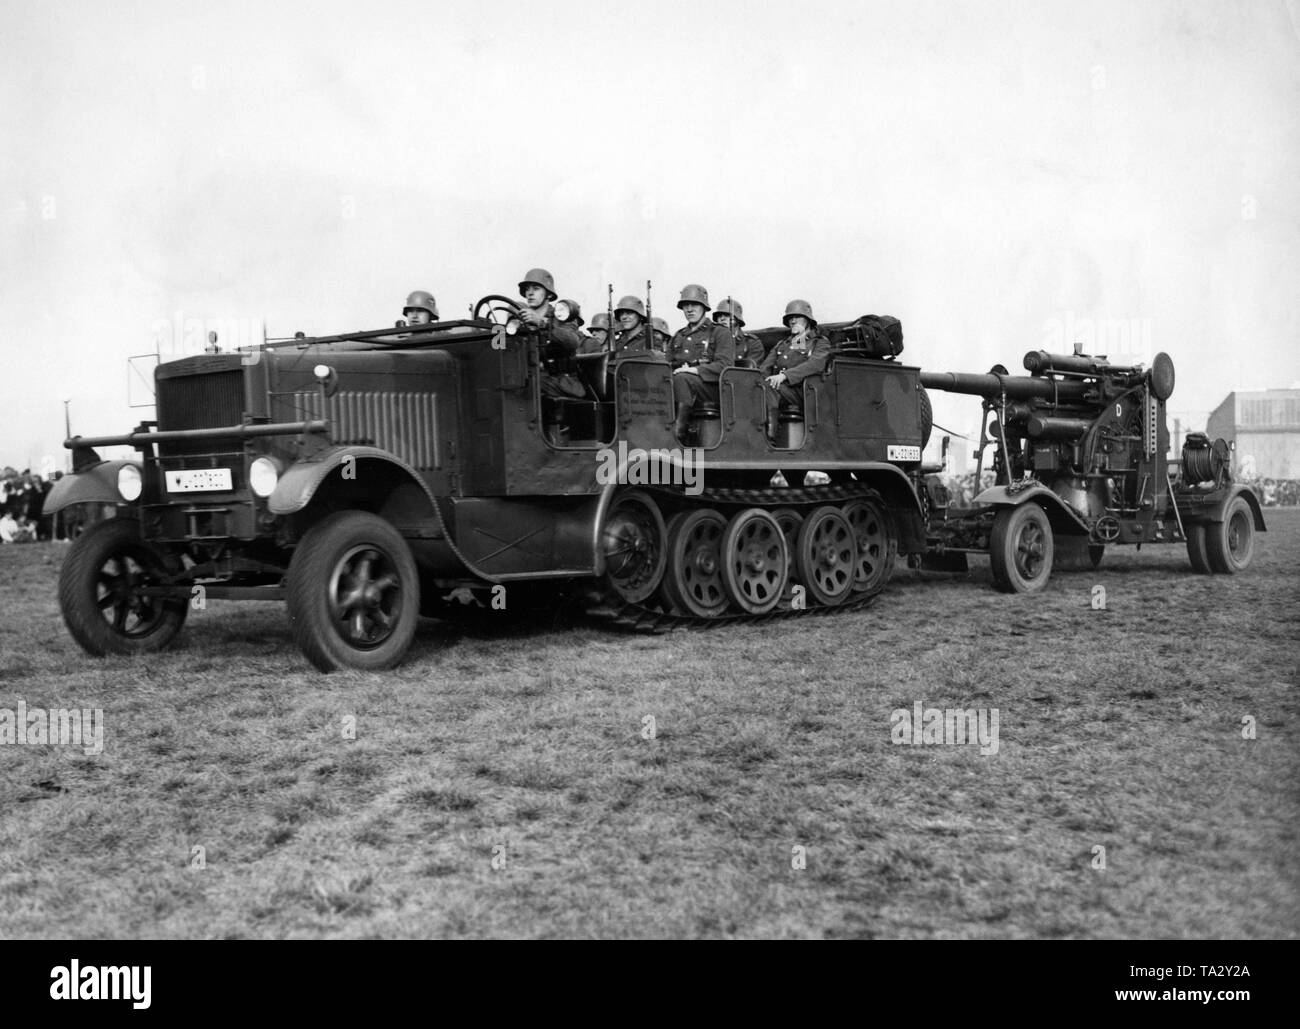 Maneuvers during the first major air show of the Luftwaffe in Staaken in favor of the Winter Relief. The picture shows soldiers in a Sd.Kfz. 6, which pulls an 8.8 cm Flak 18. In the background, crowds of spectators. Stock Photo